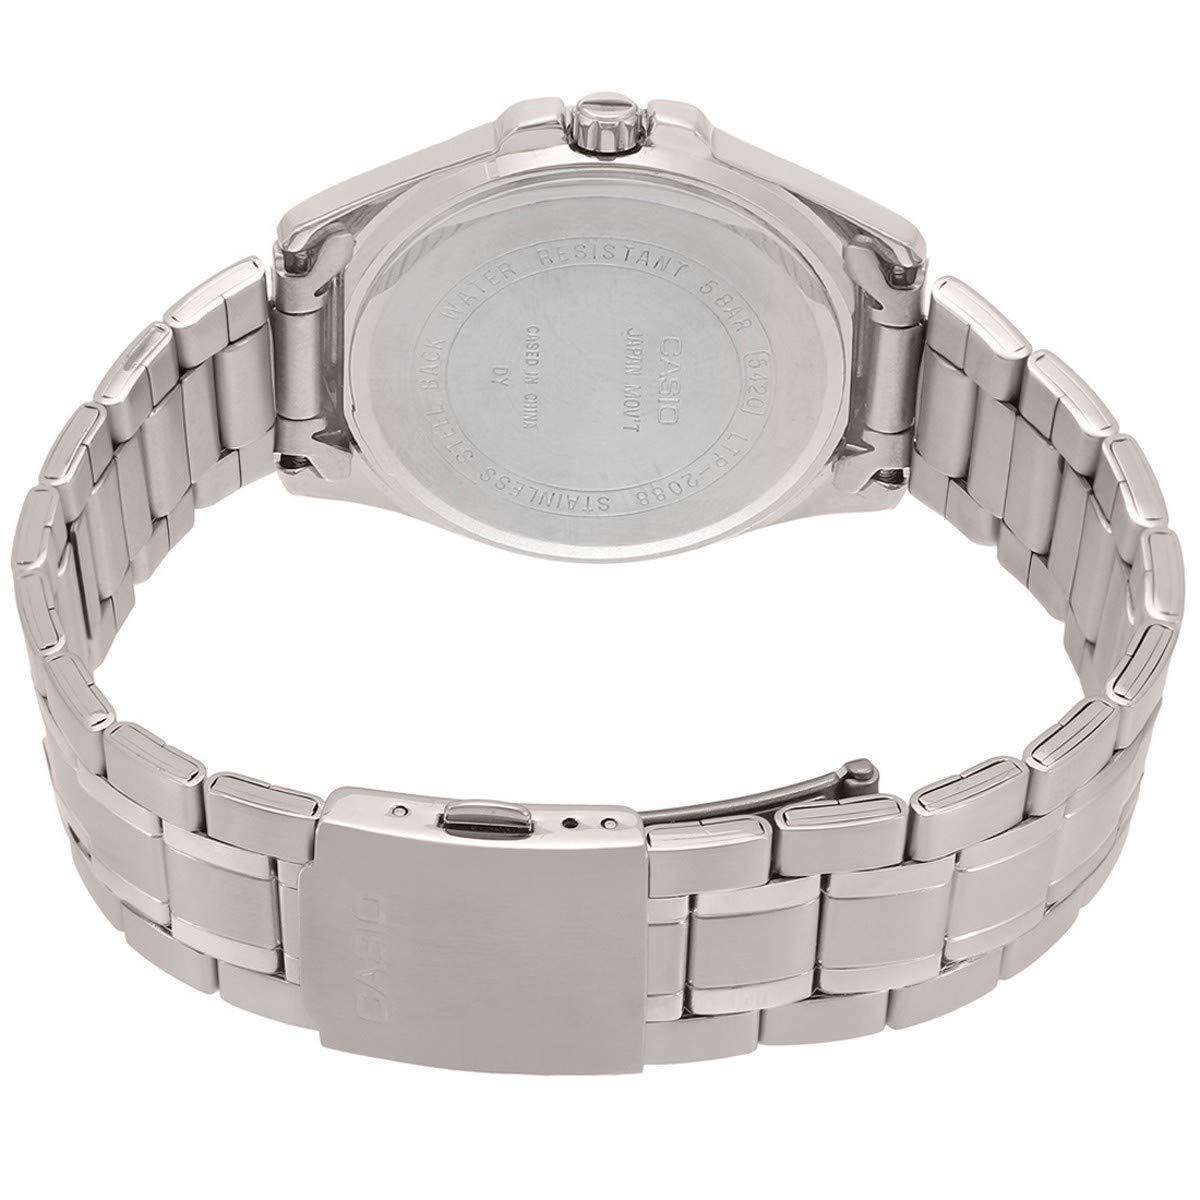 Casio LTP-2088D-2A2 Silver Stainless Watch for Women-Watch Portal Philippines